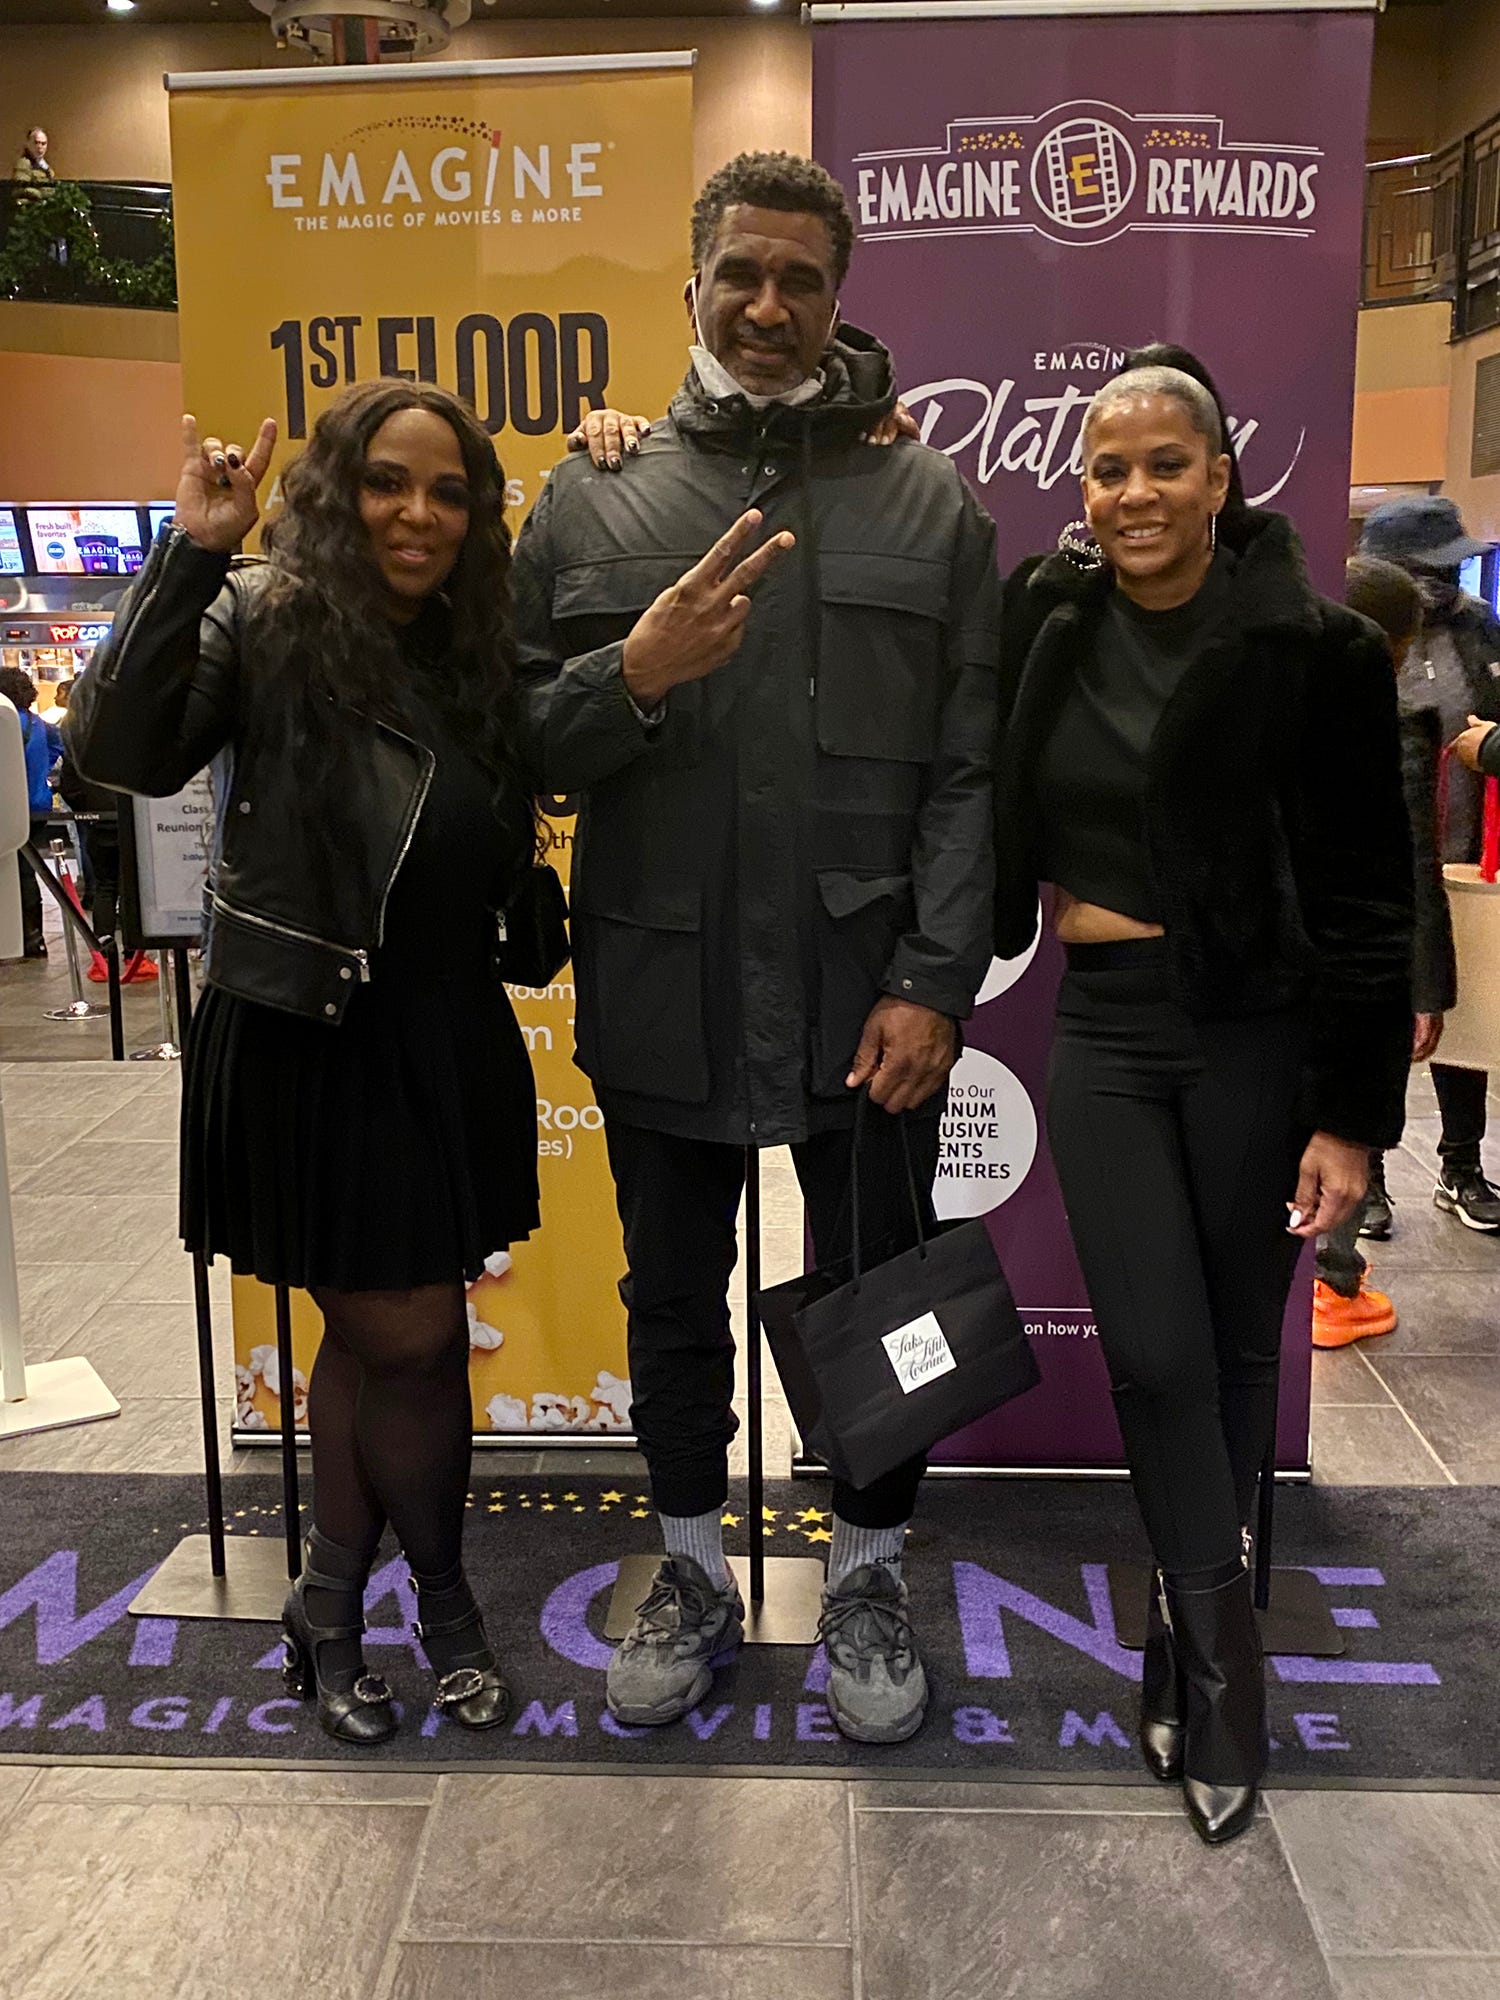 From left to right, Dorothy Burston of “Tuff Cookiez”, Horatio Williams, founder of The Horatio Williams Foundation and Tonesa Welch of SylentHeart Foundation all pose together after the King Richard screening in the lobby of the Emagine Theatre in Royal Oak on Nov 20, 2021.